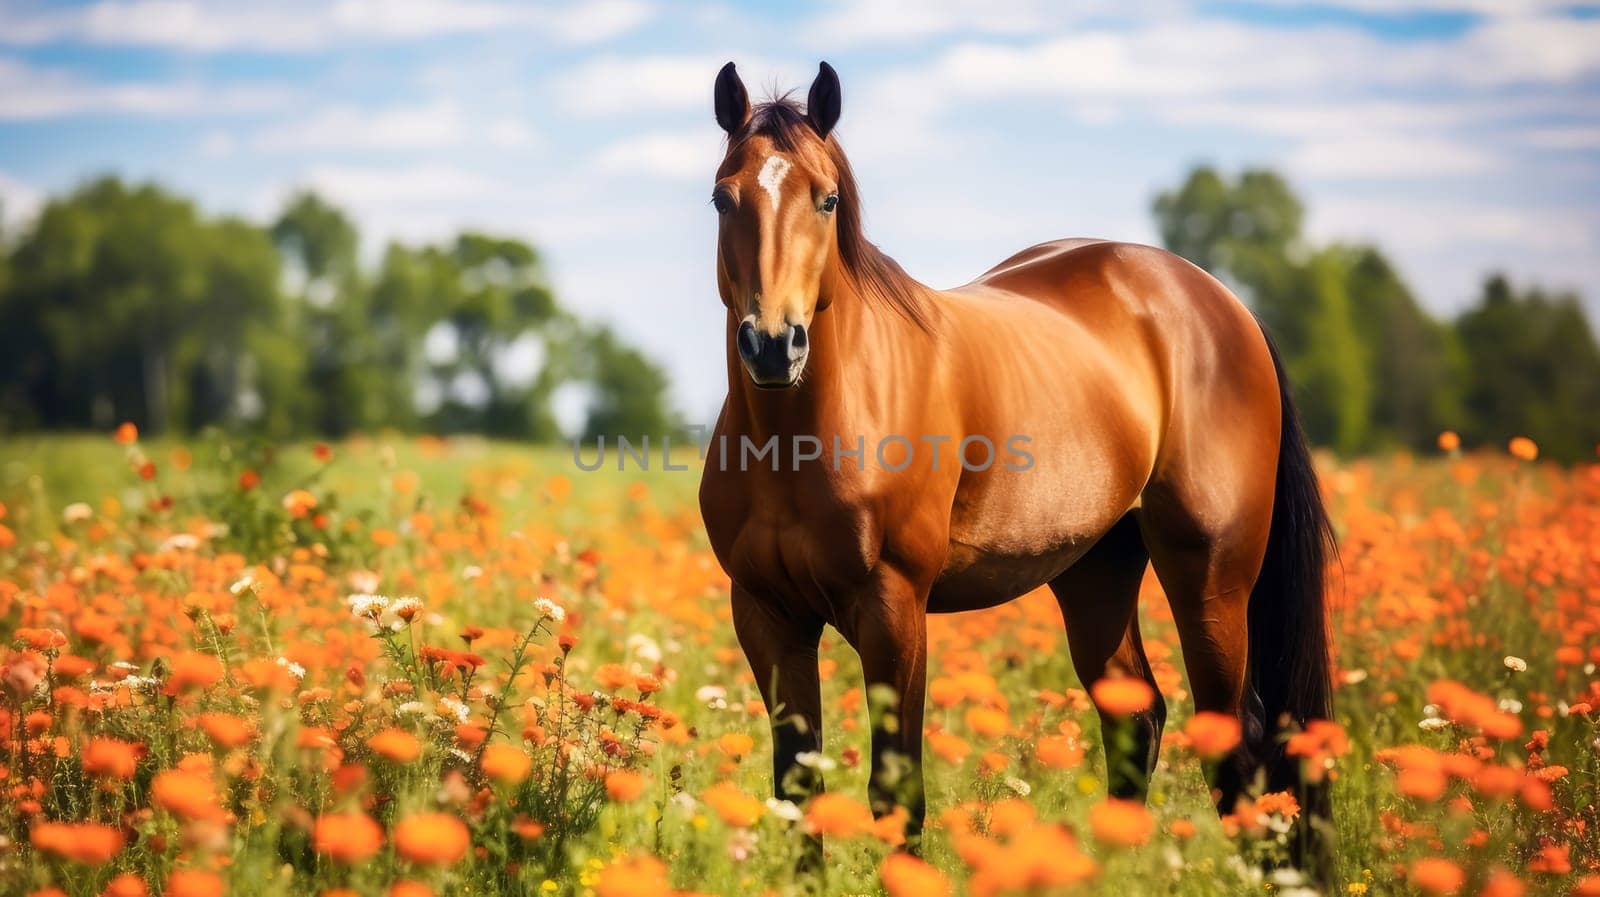 Cute, beautiful horse in a field with flowers in nature, in the sun's rays. by Alla_Yurtayeva